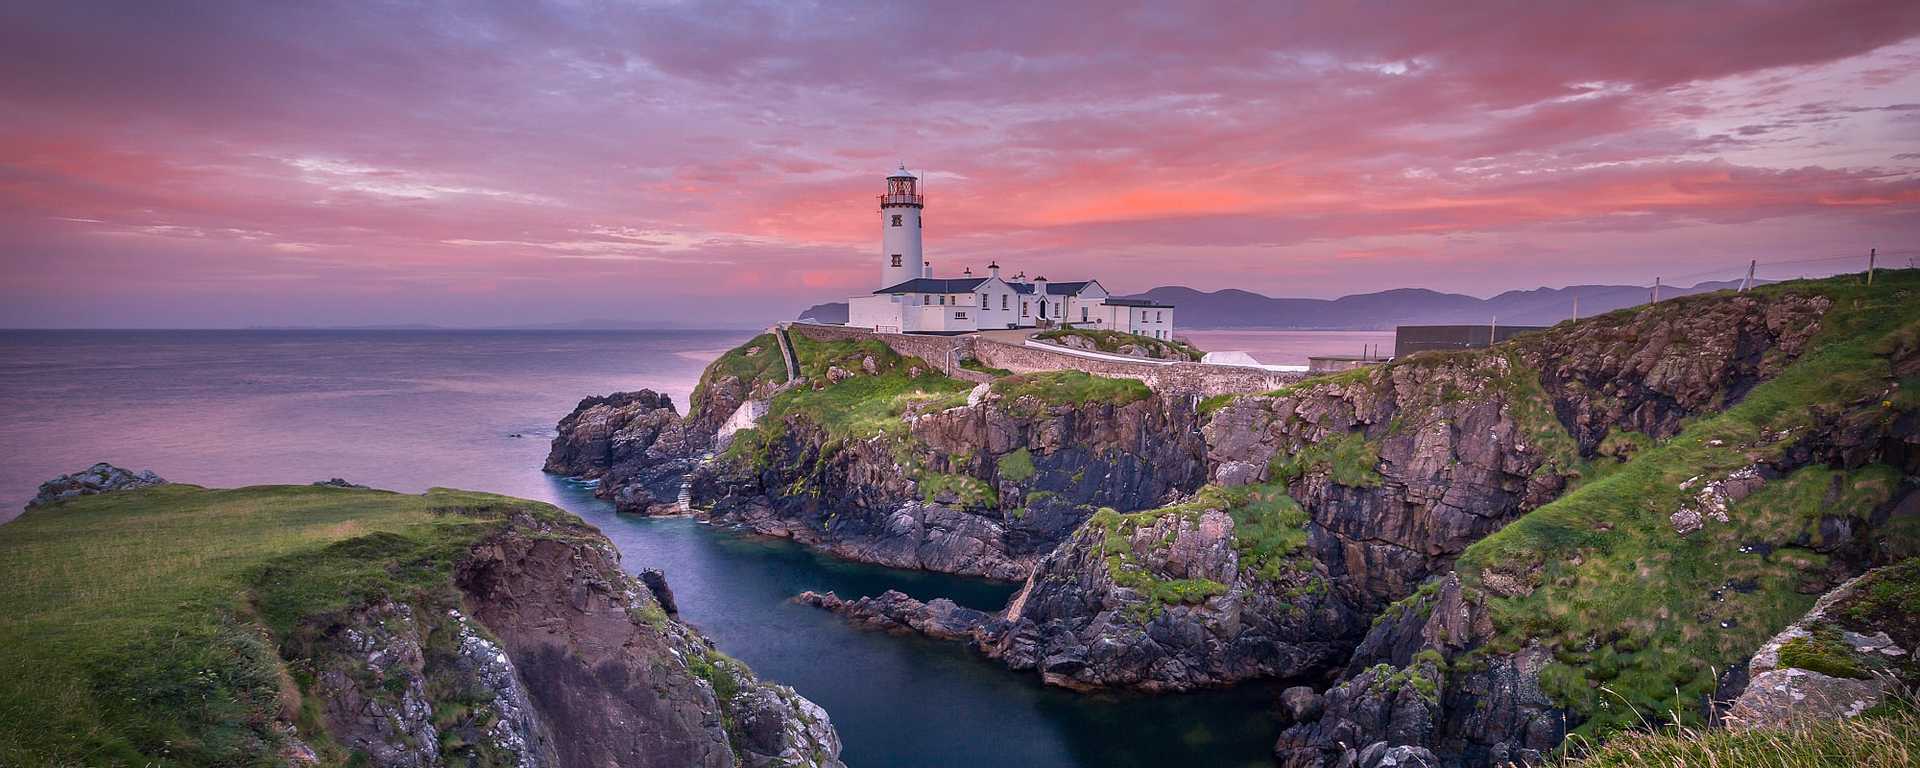 Fanad Head Lighthouse in Donegal, Ireland